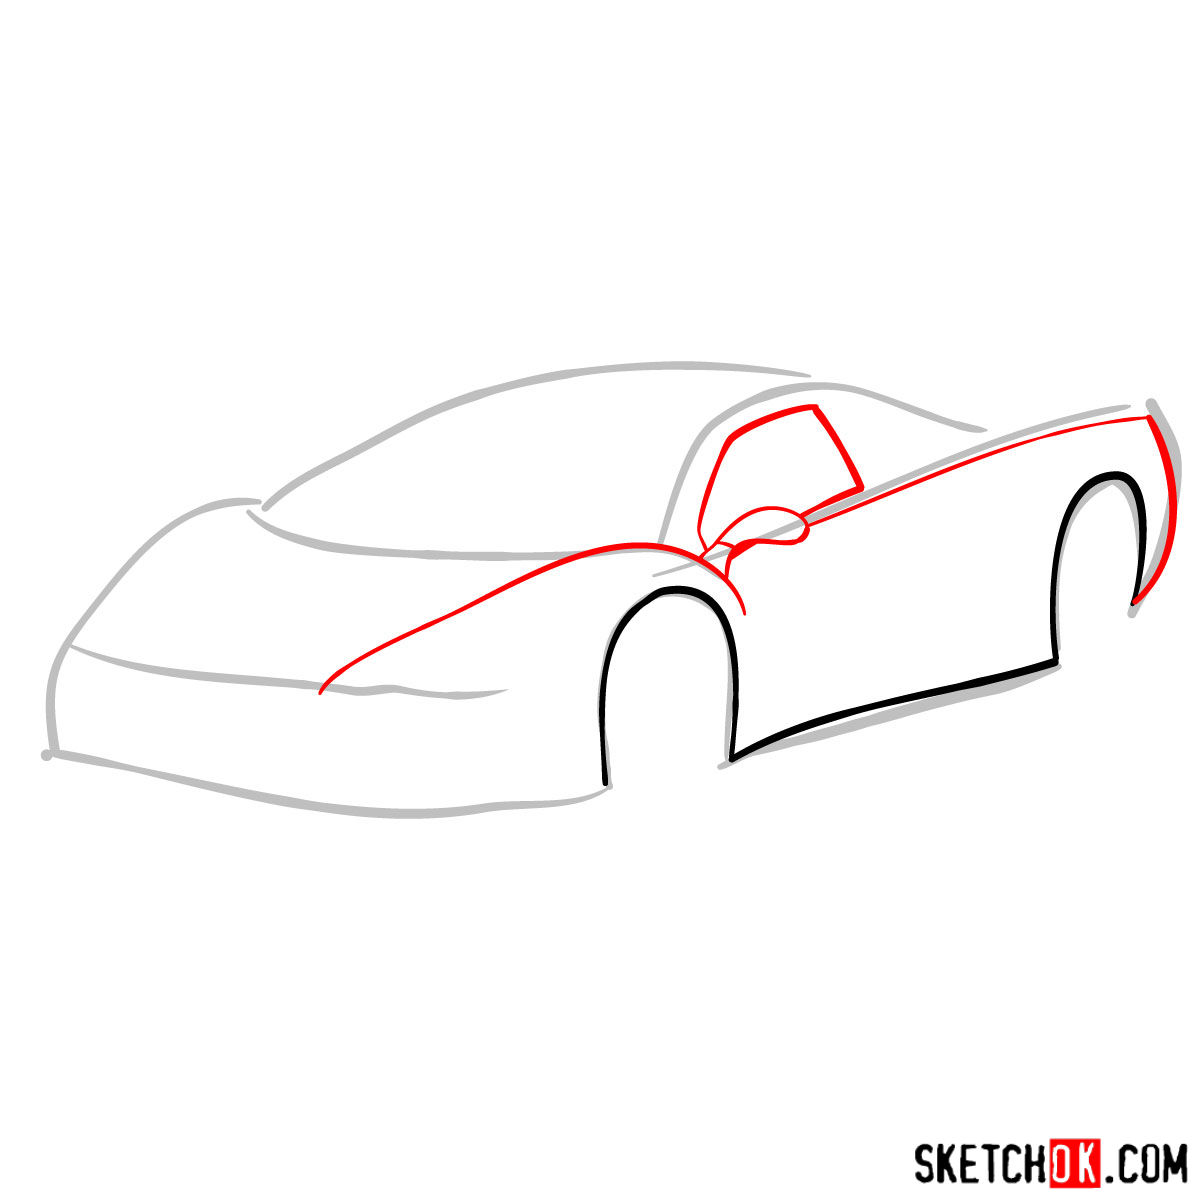 How to draw SSC Ultimate Aero TT 2006 - step 03